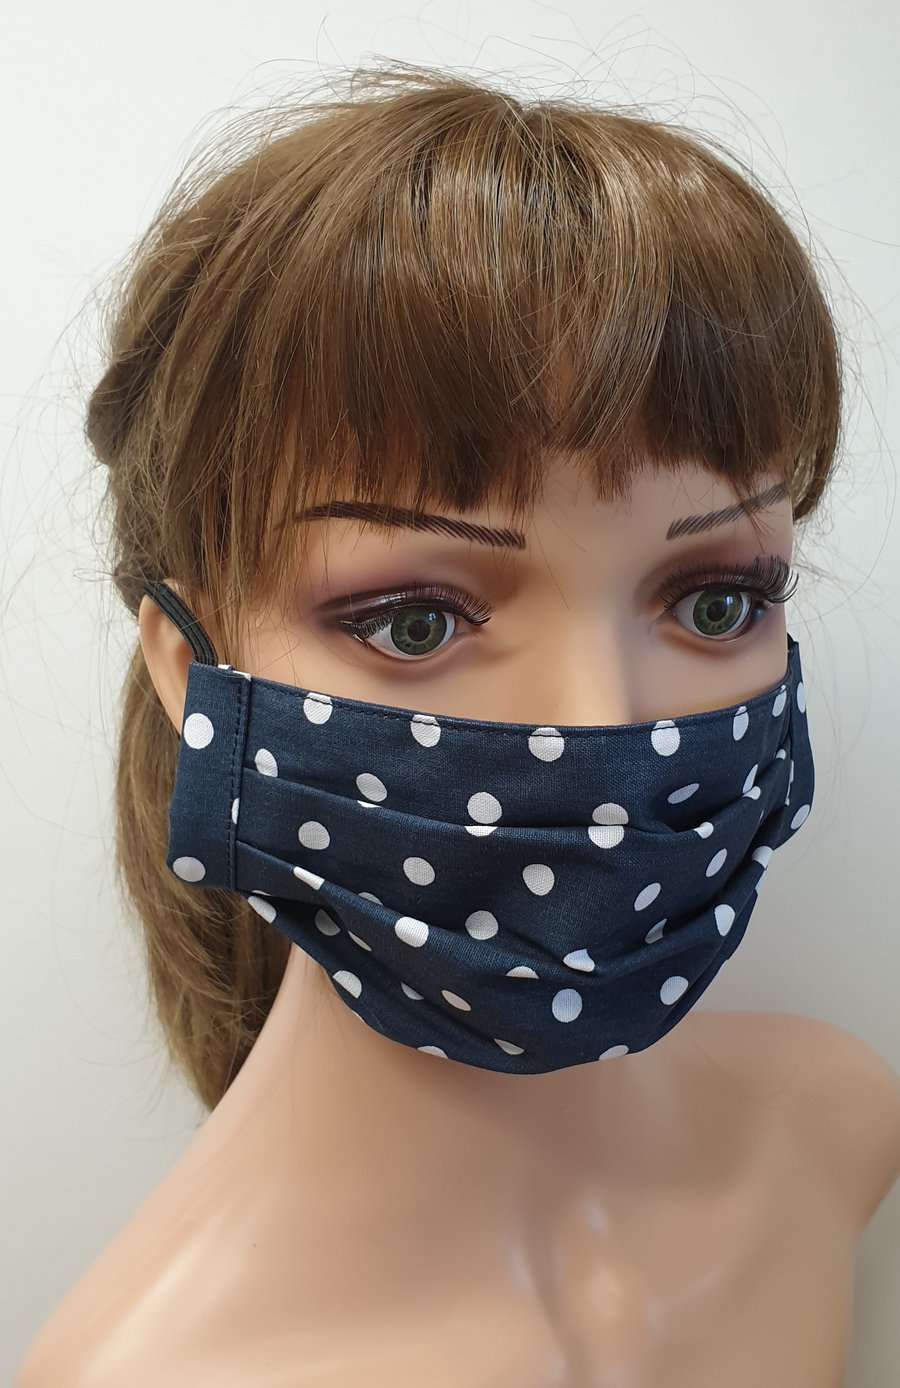 Reusable dotted face mask